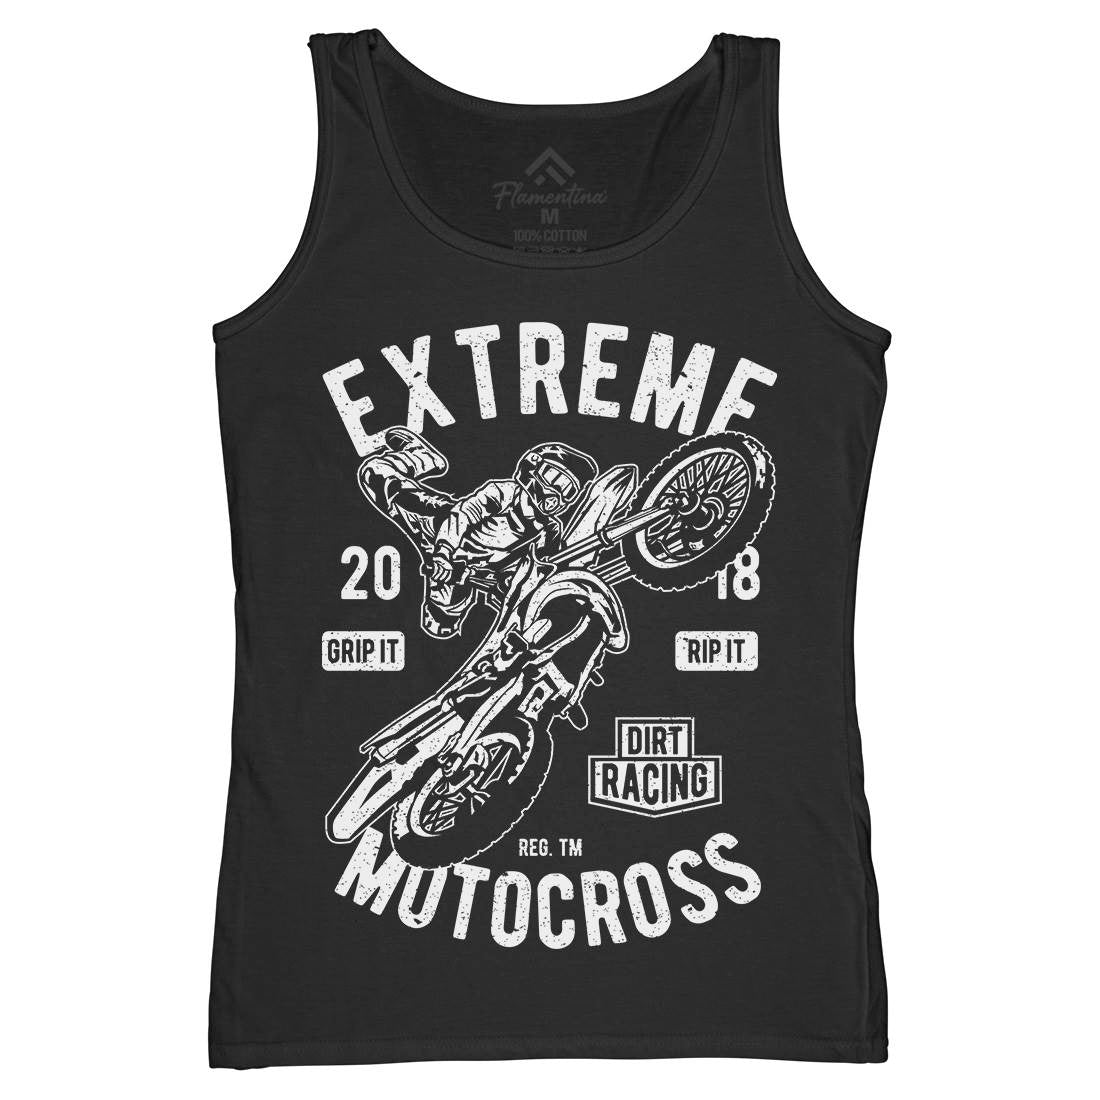 Extreme Motocross Womens Organic Tank Top Vest Motorcycles A651